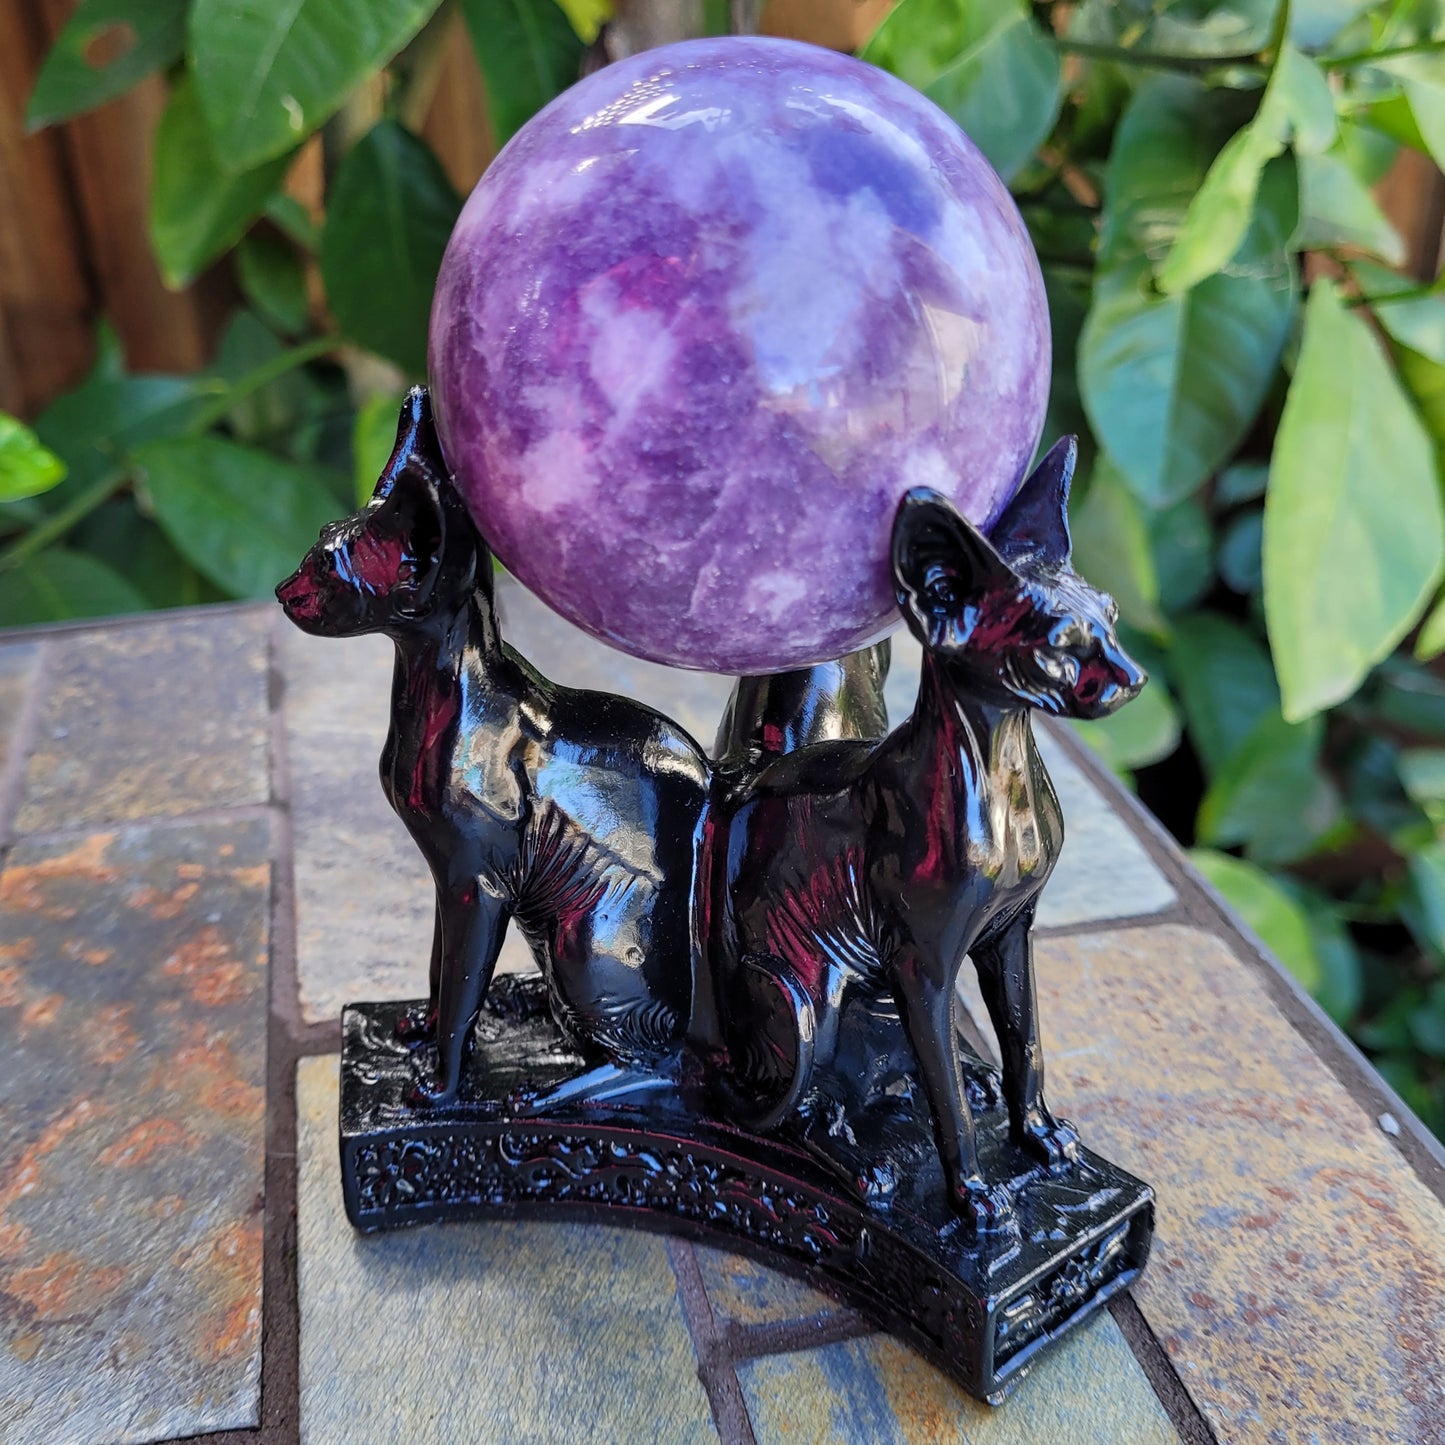 Egyptian Cat Sphere Display Stand in Purple or Black for Crystal Balls or Eggs 2" to 5" (51mm to 126mm)